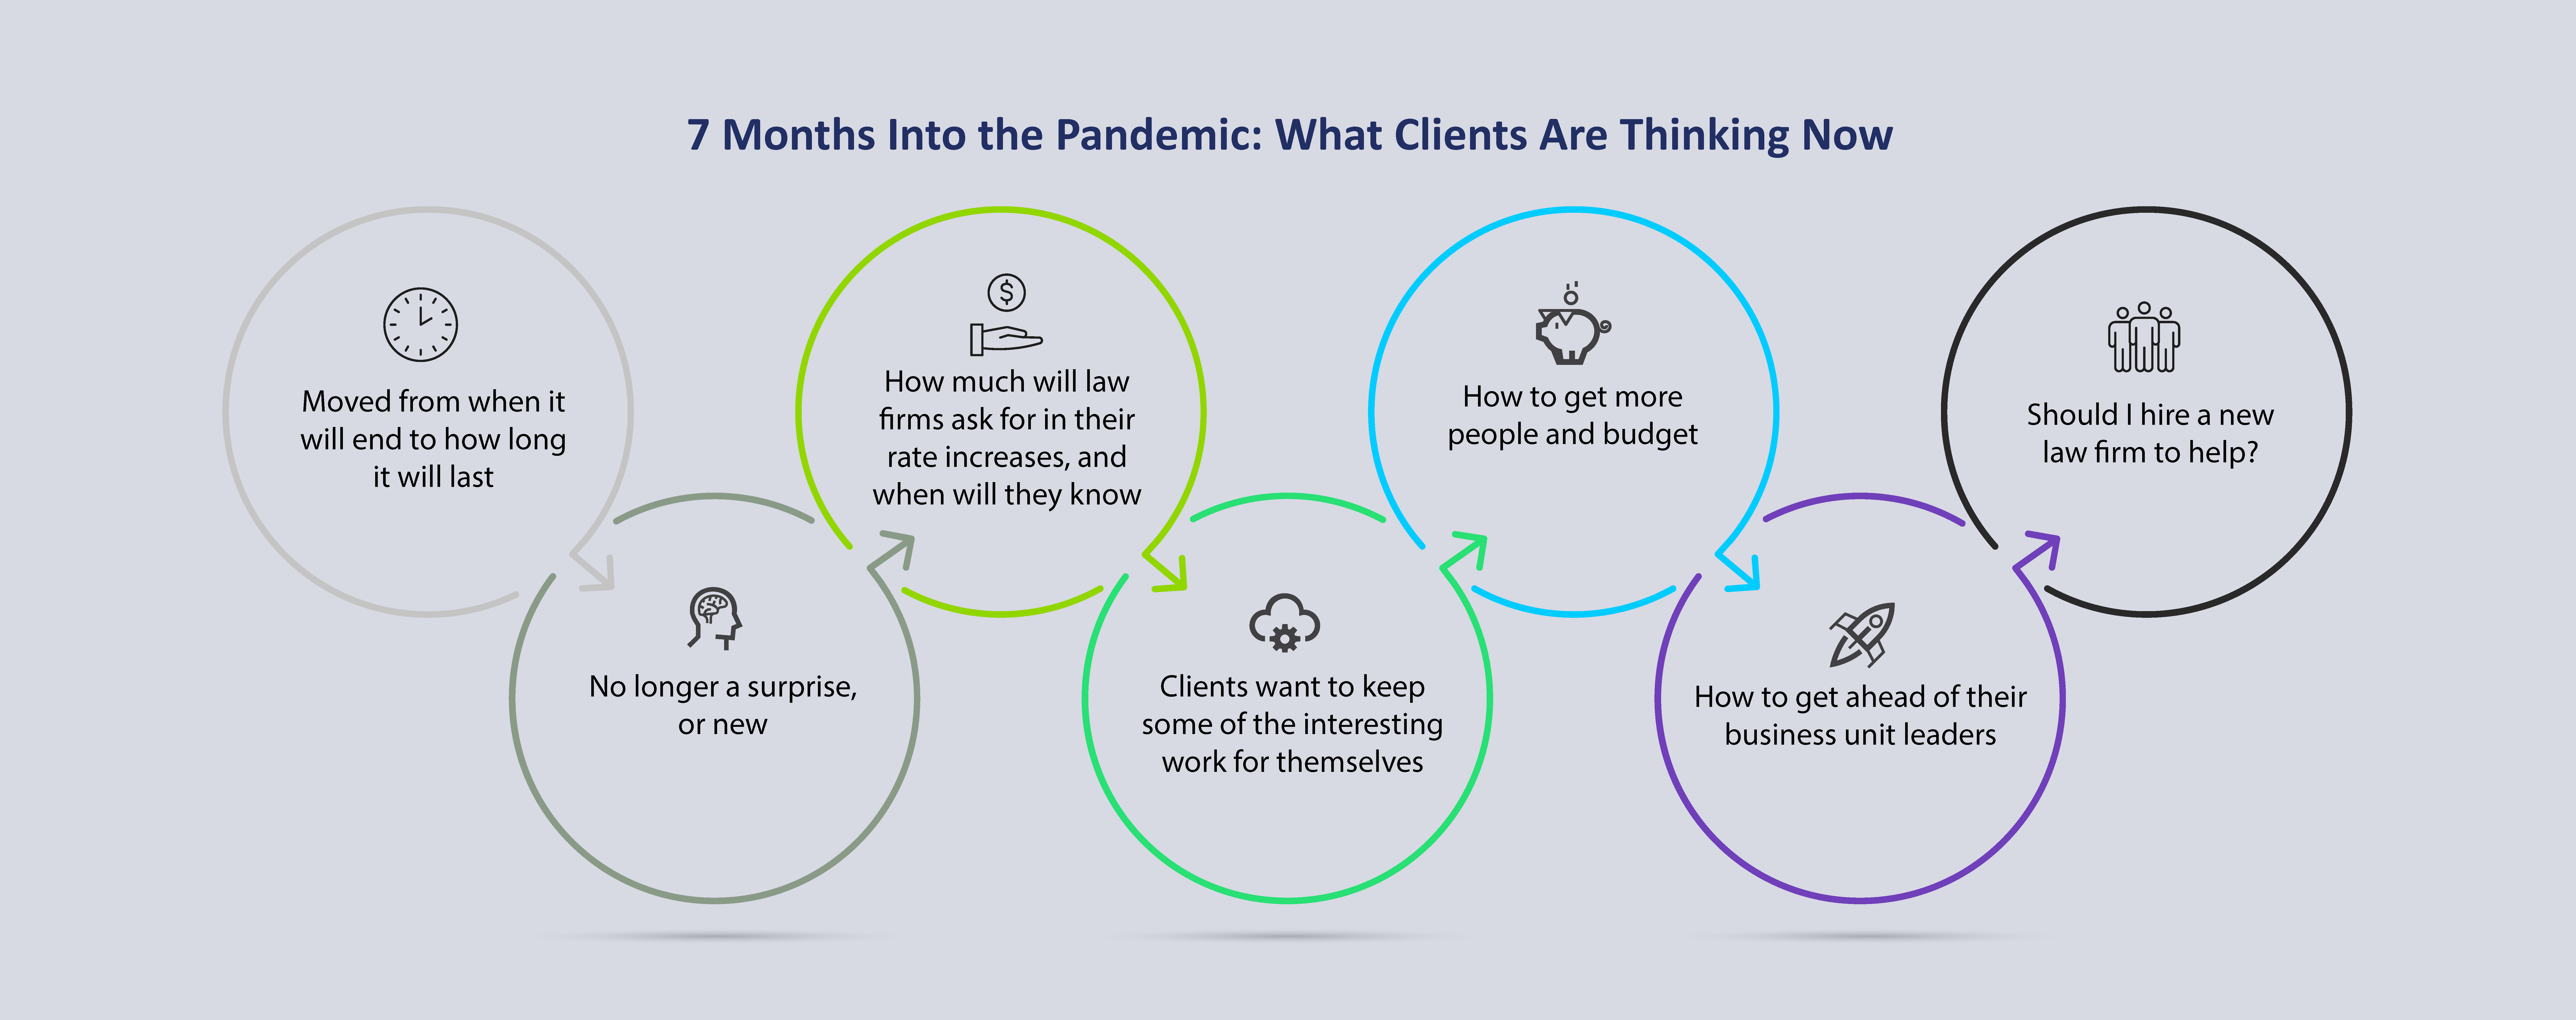 7 Months Into the Pandemic: What Clients Are Thinking Now